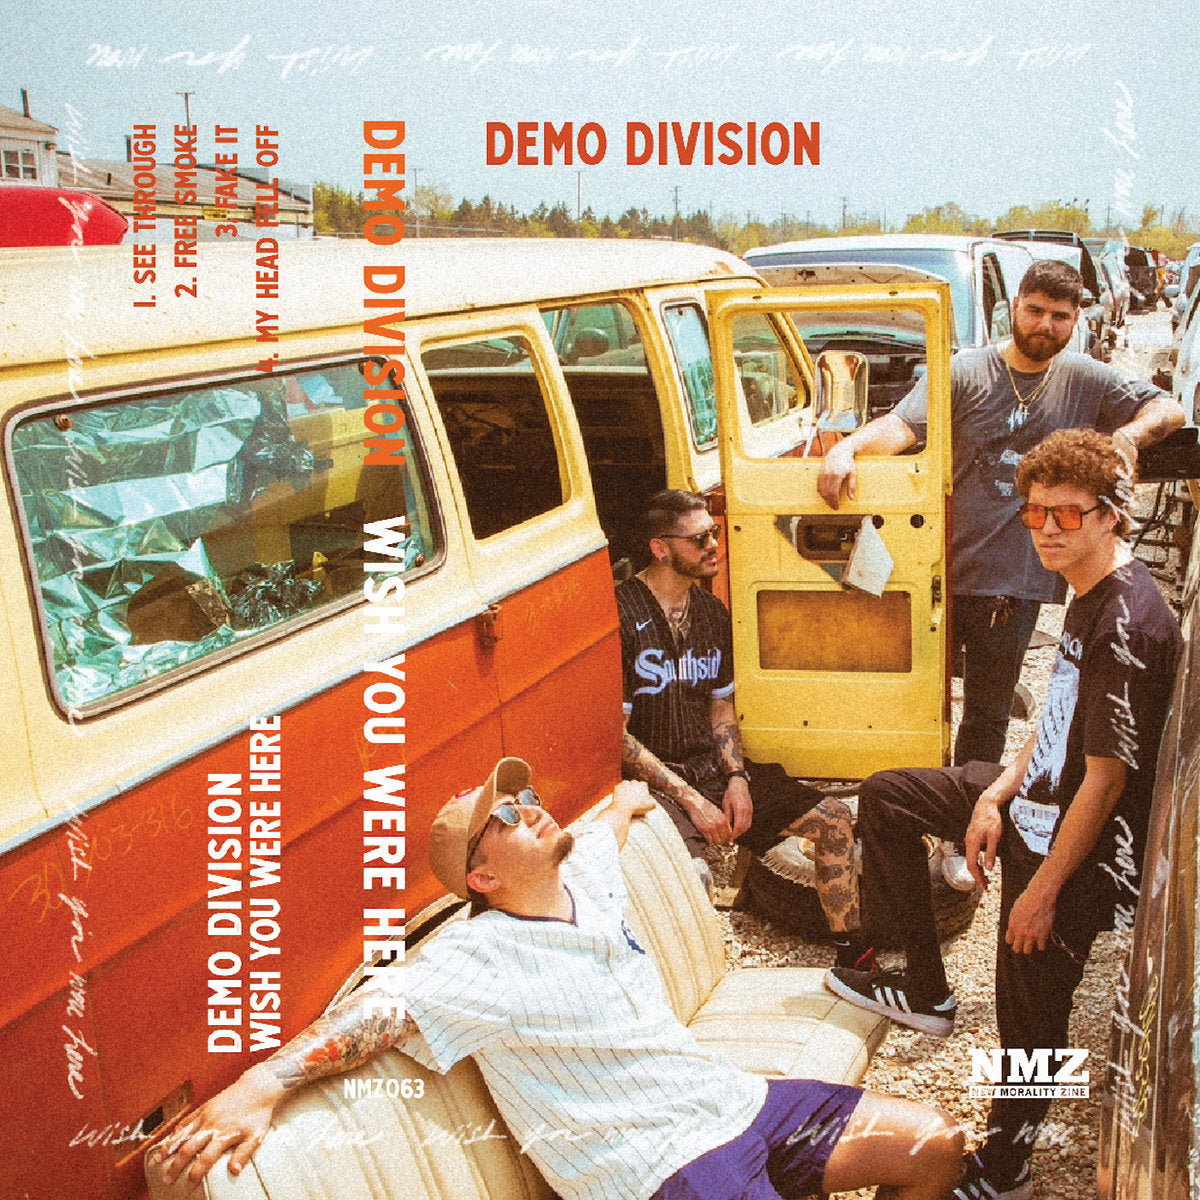 Demo Division  "Wish You Were Here" CS